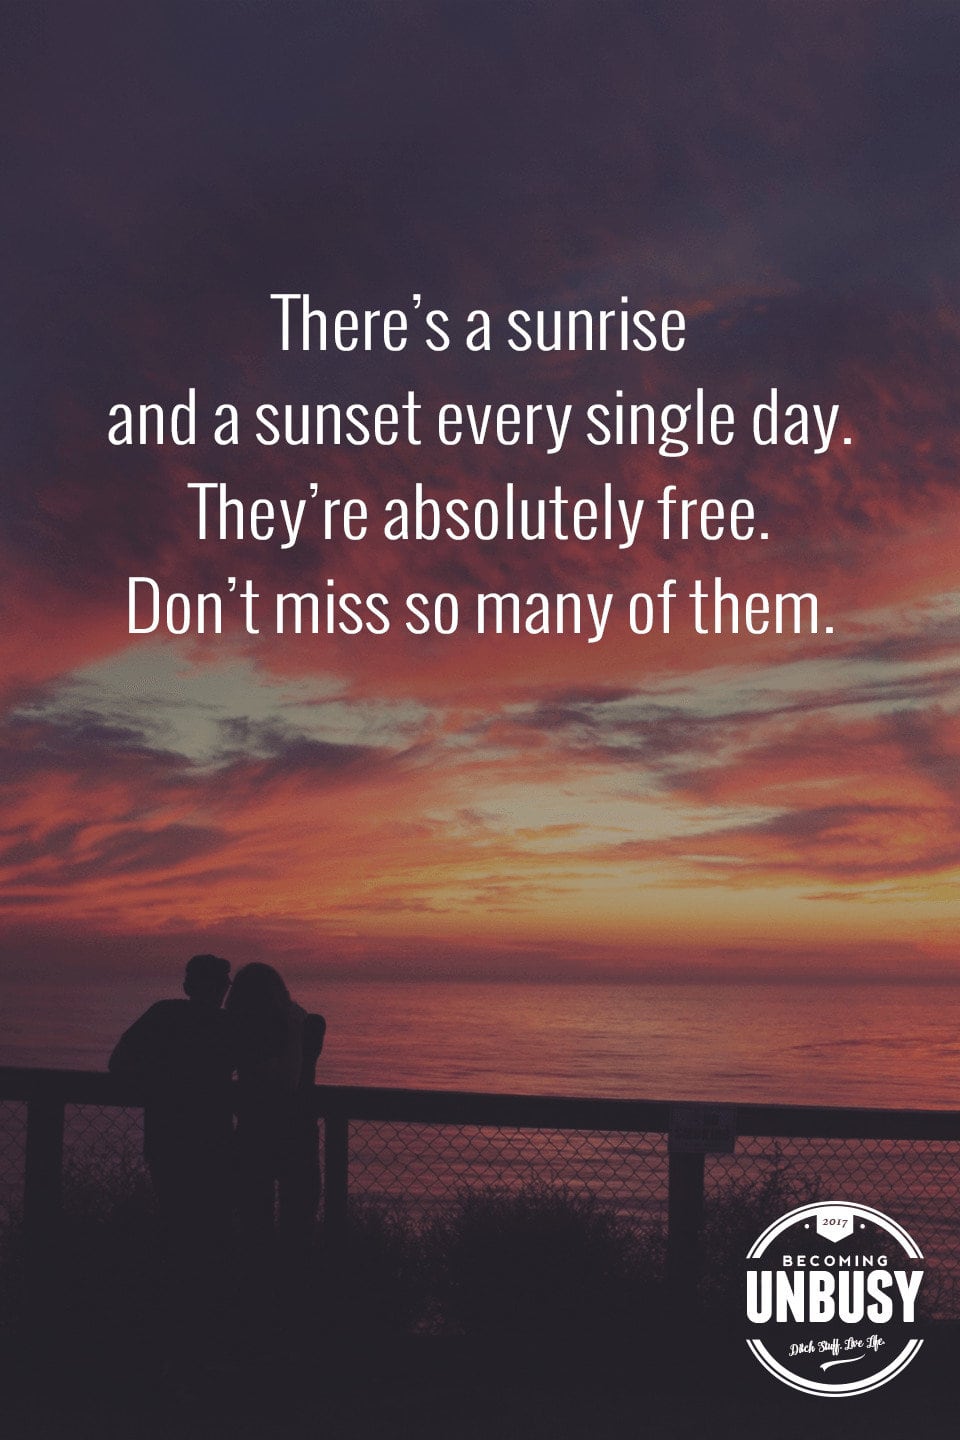 The following fall bucket list quote written over a photo of two people standing at a fence overlooking the sunset. "There's a sunrise and a sunset every single day. They're absolutely free. Don't miss so many of them."